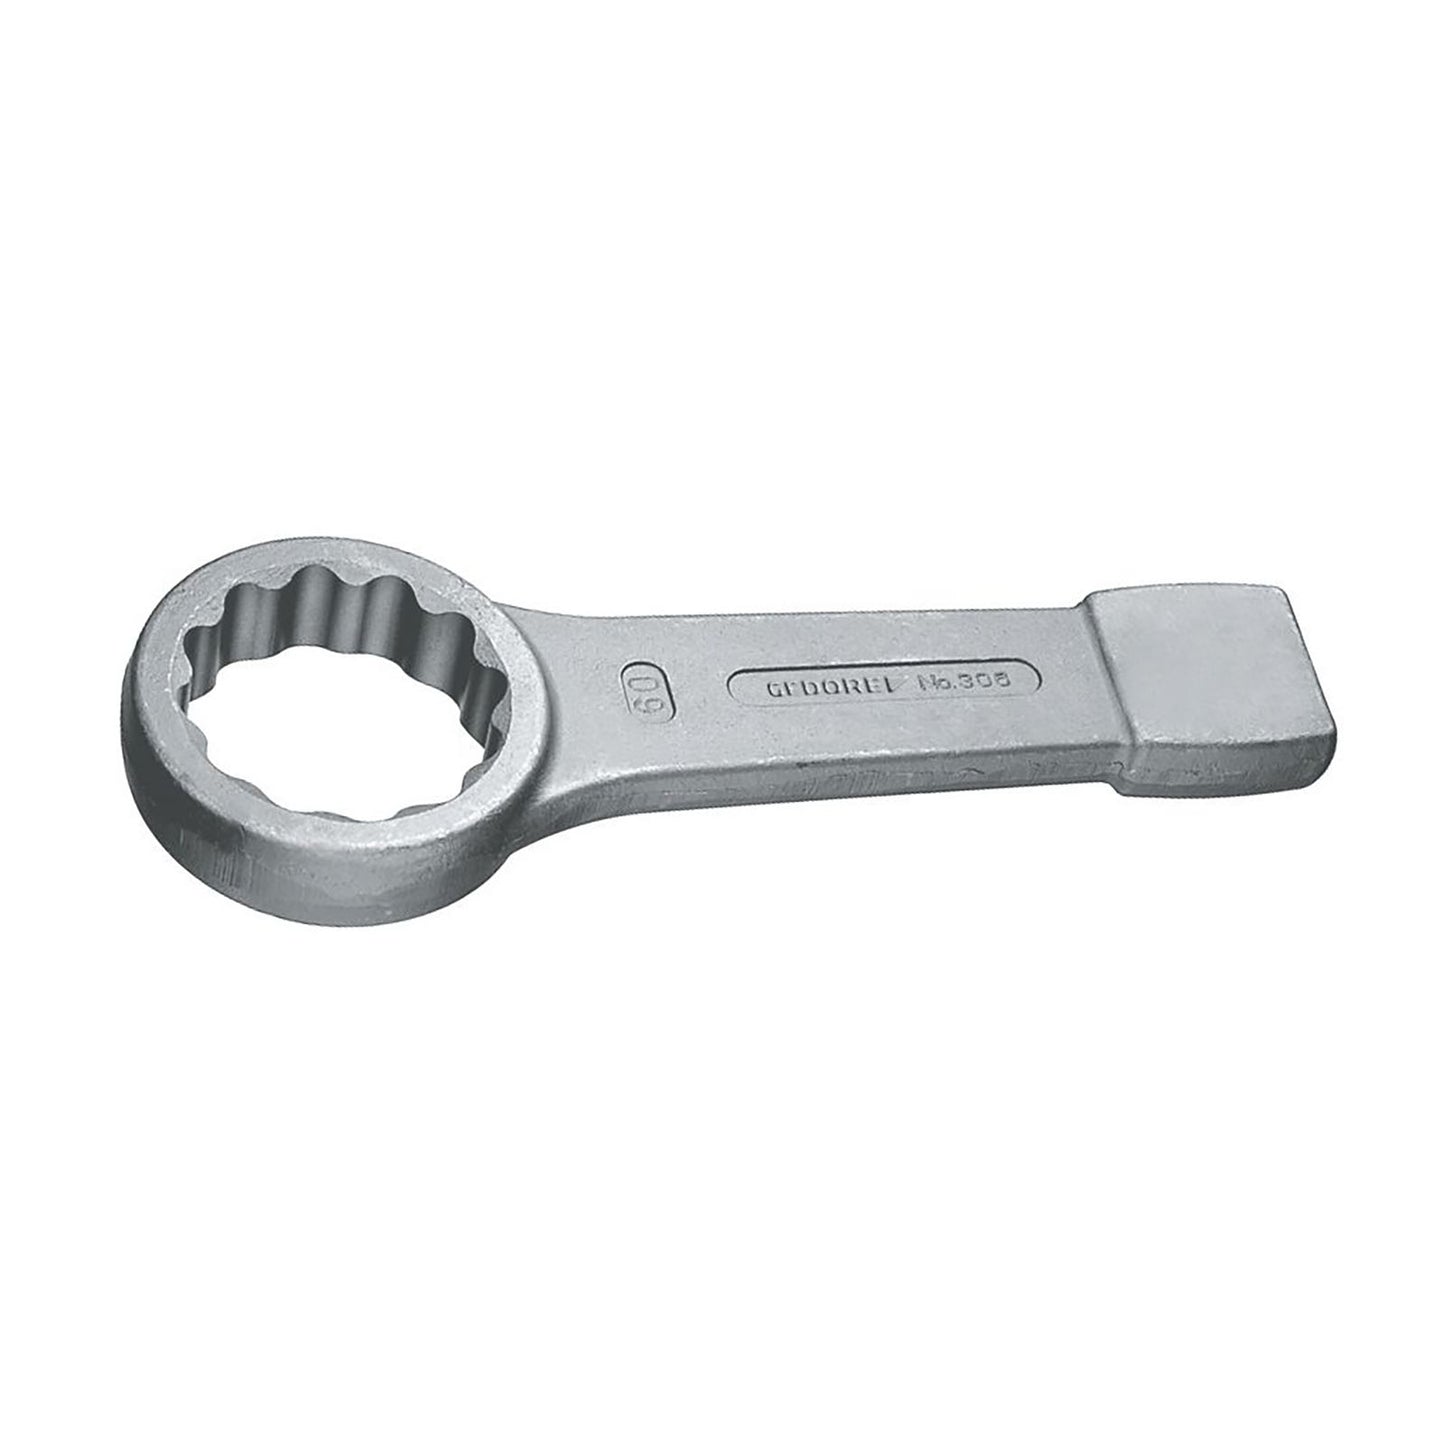 GEDORE 306 30 - Closed Strike Wrench, 30mm (6475270)